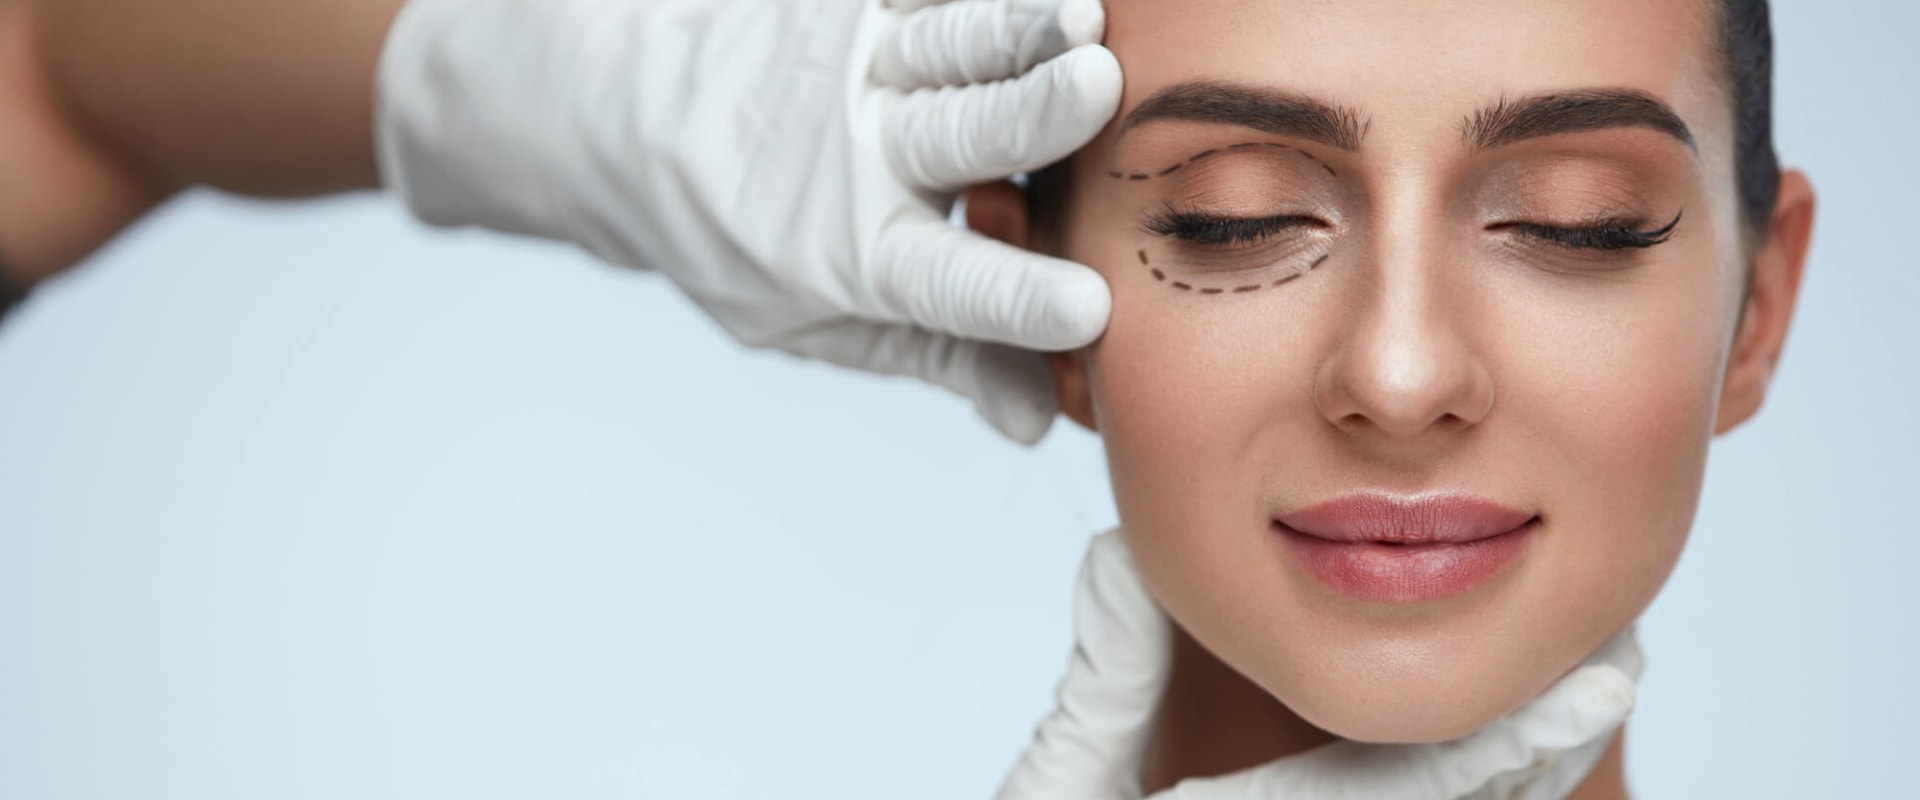 The Most Common Types of Aesthetic Surgery